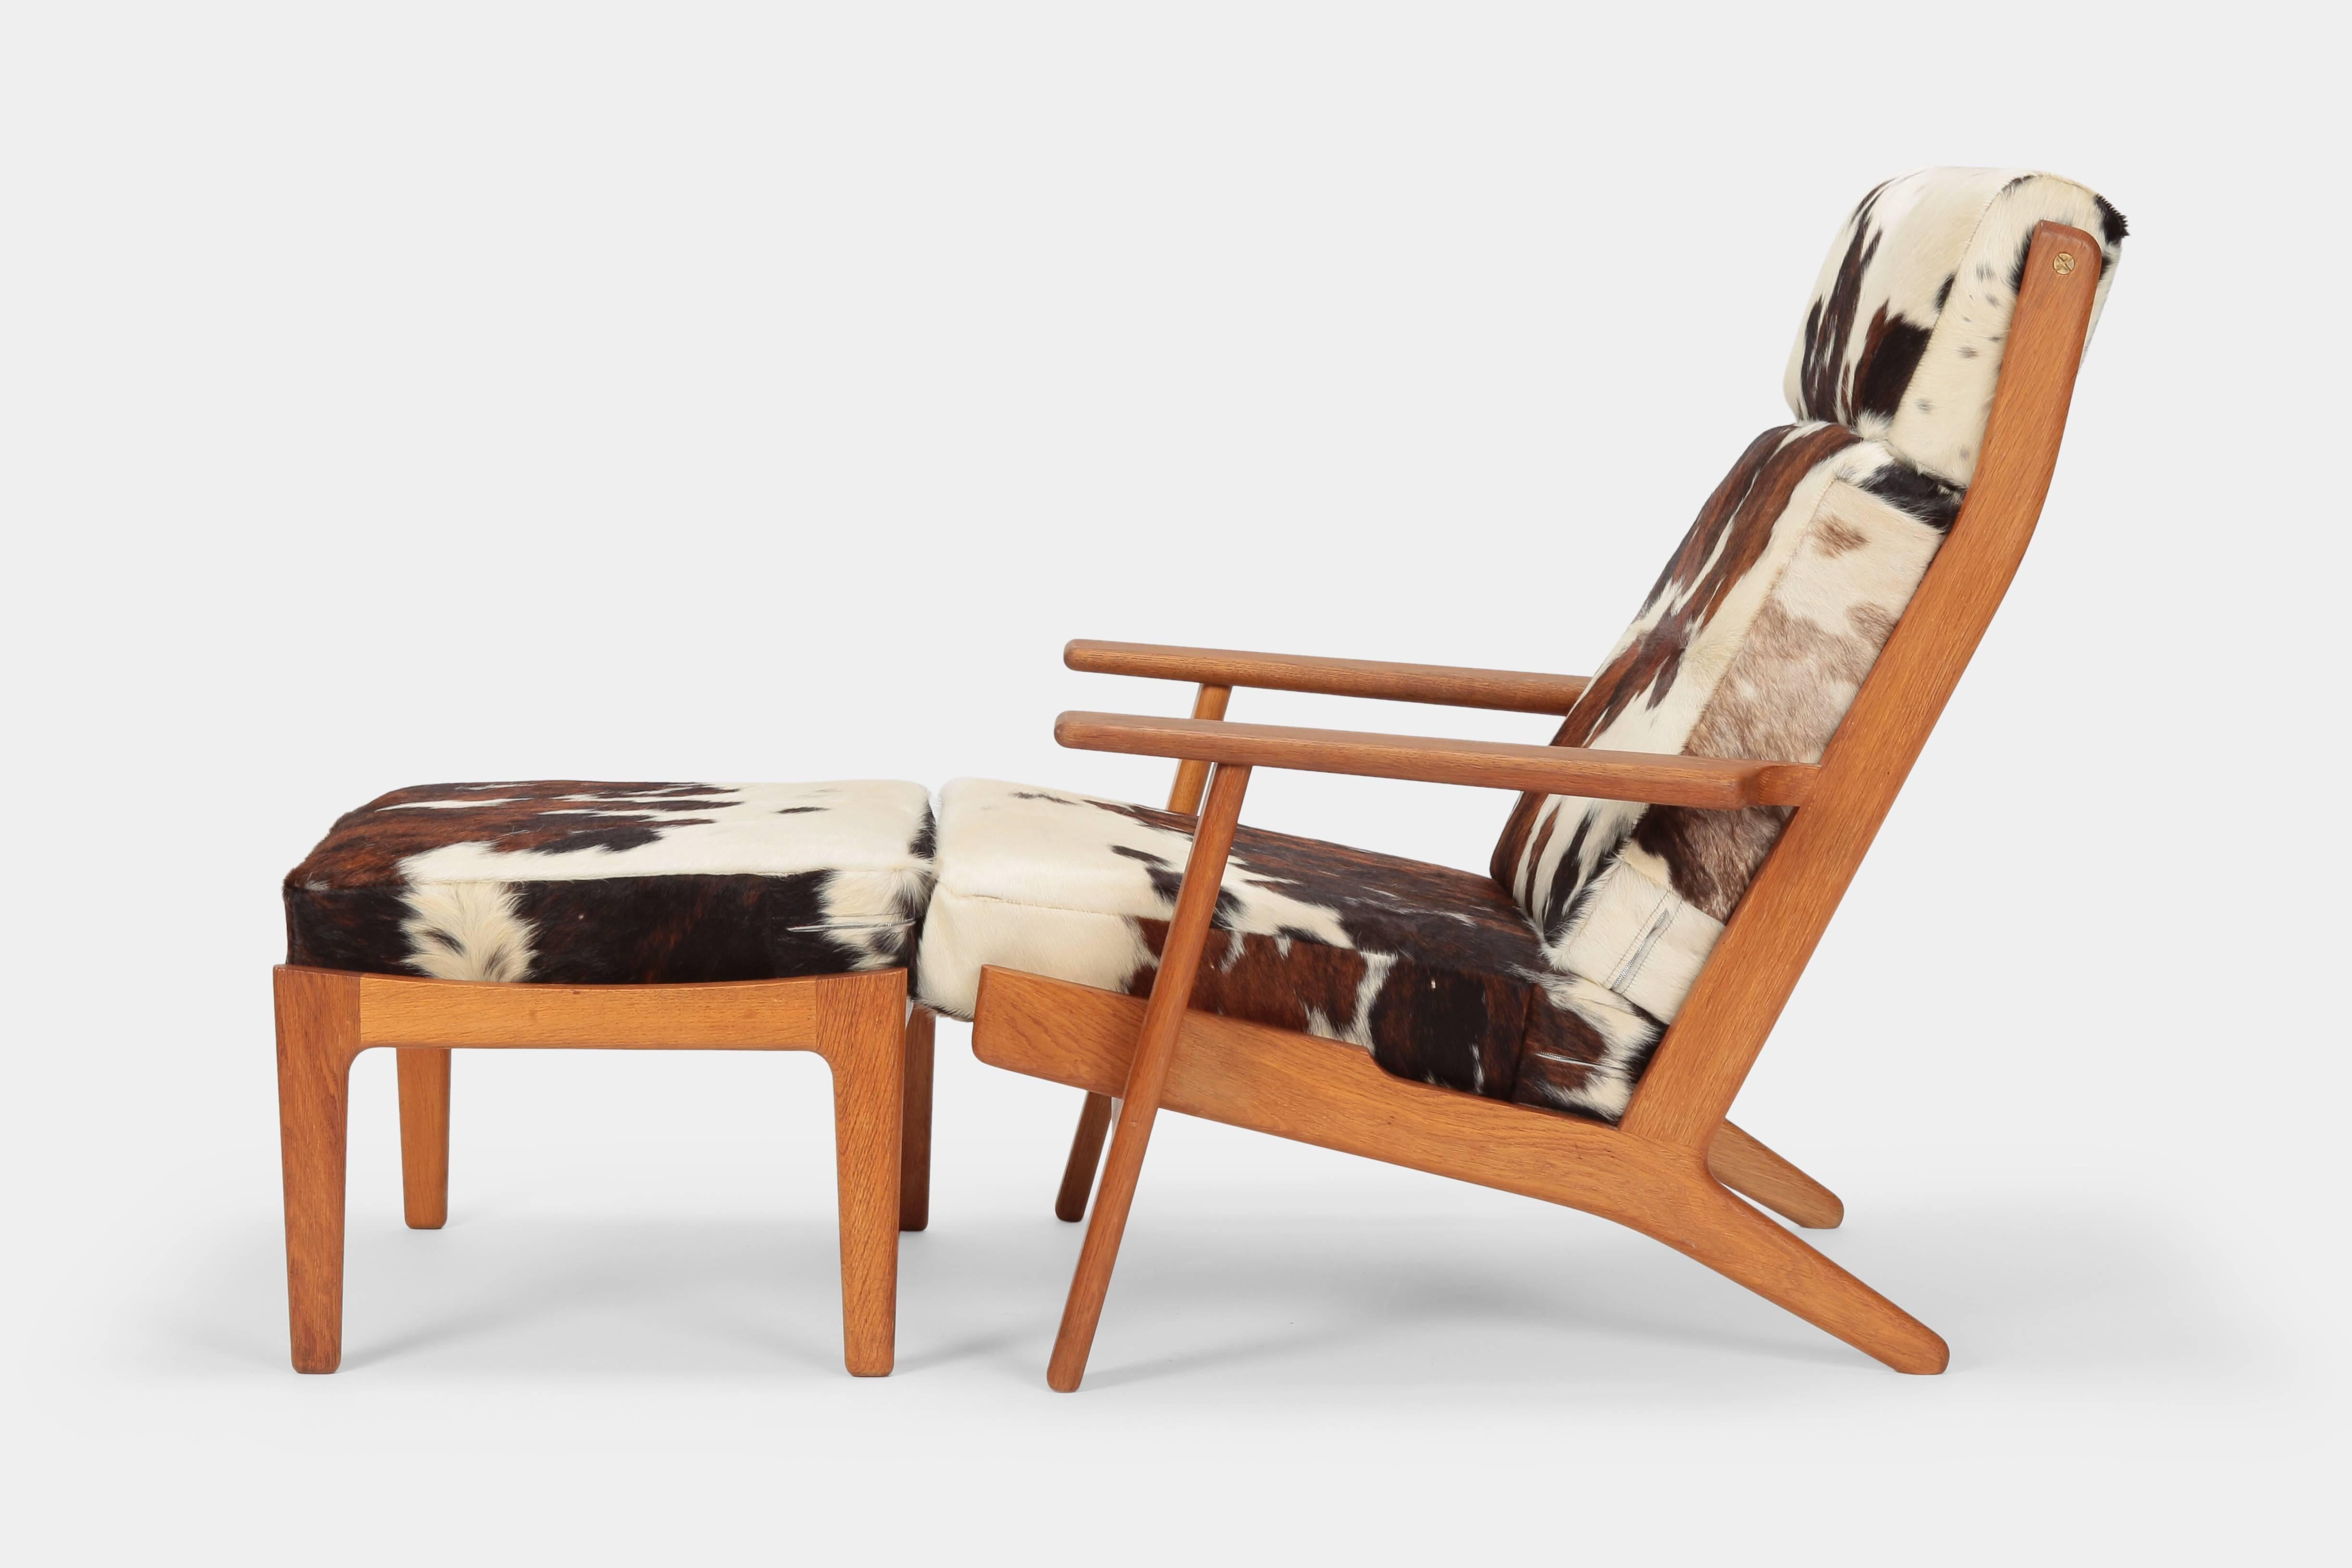 Hans J. Wegner GE-290 lounge chair manufactured by GETAMA in the 1960s in Denmark. High back lounge chair with a edgy shaped solid oak wood frame and wide armrests. The cushions are newly covered with wonderful patterned